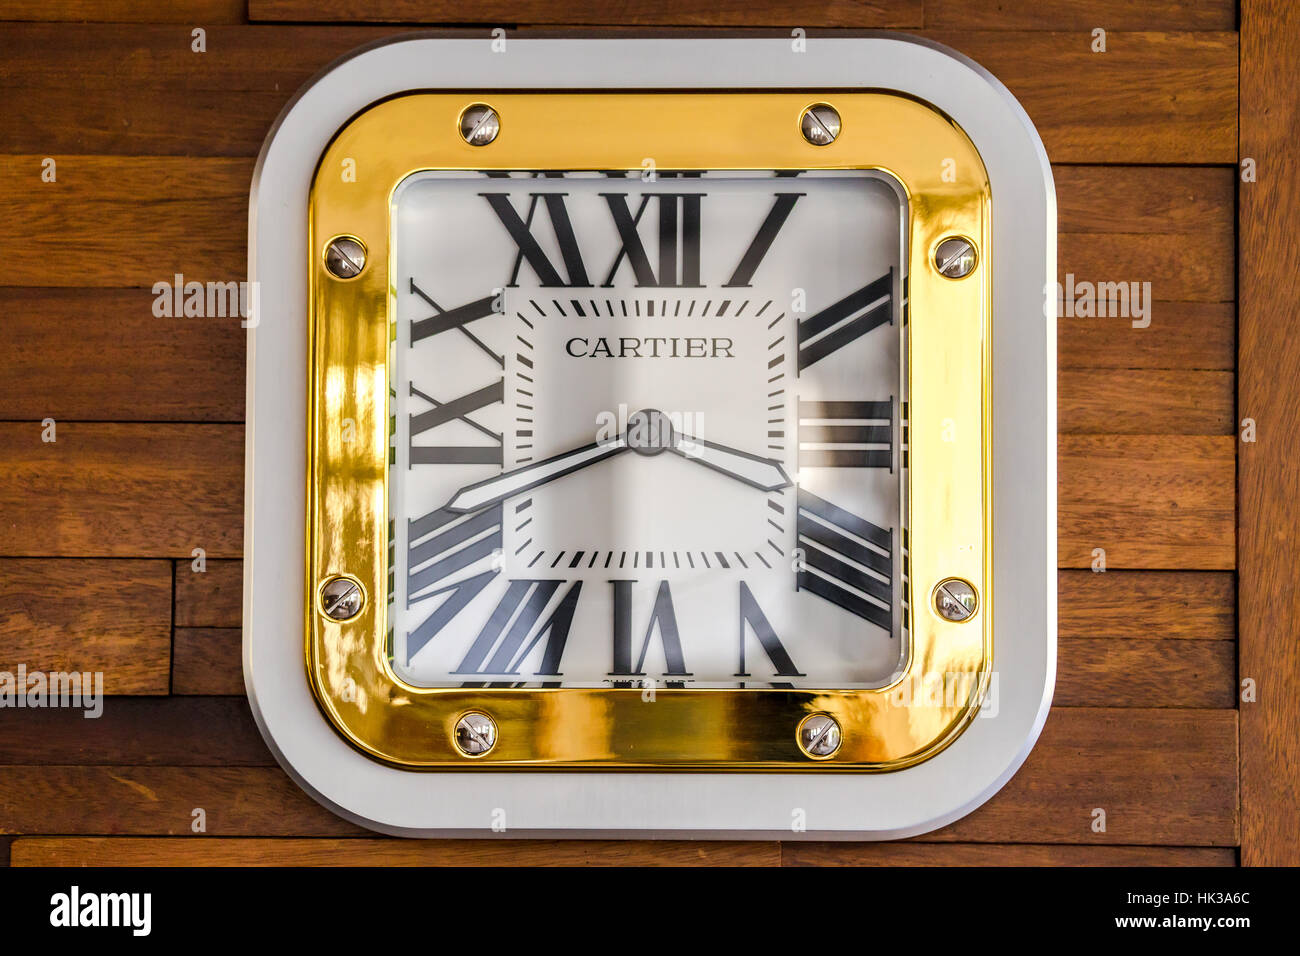 Luxury Cartier square wall clock on a wooden wall Stock Photo